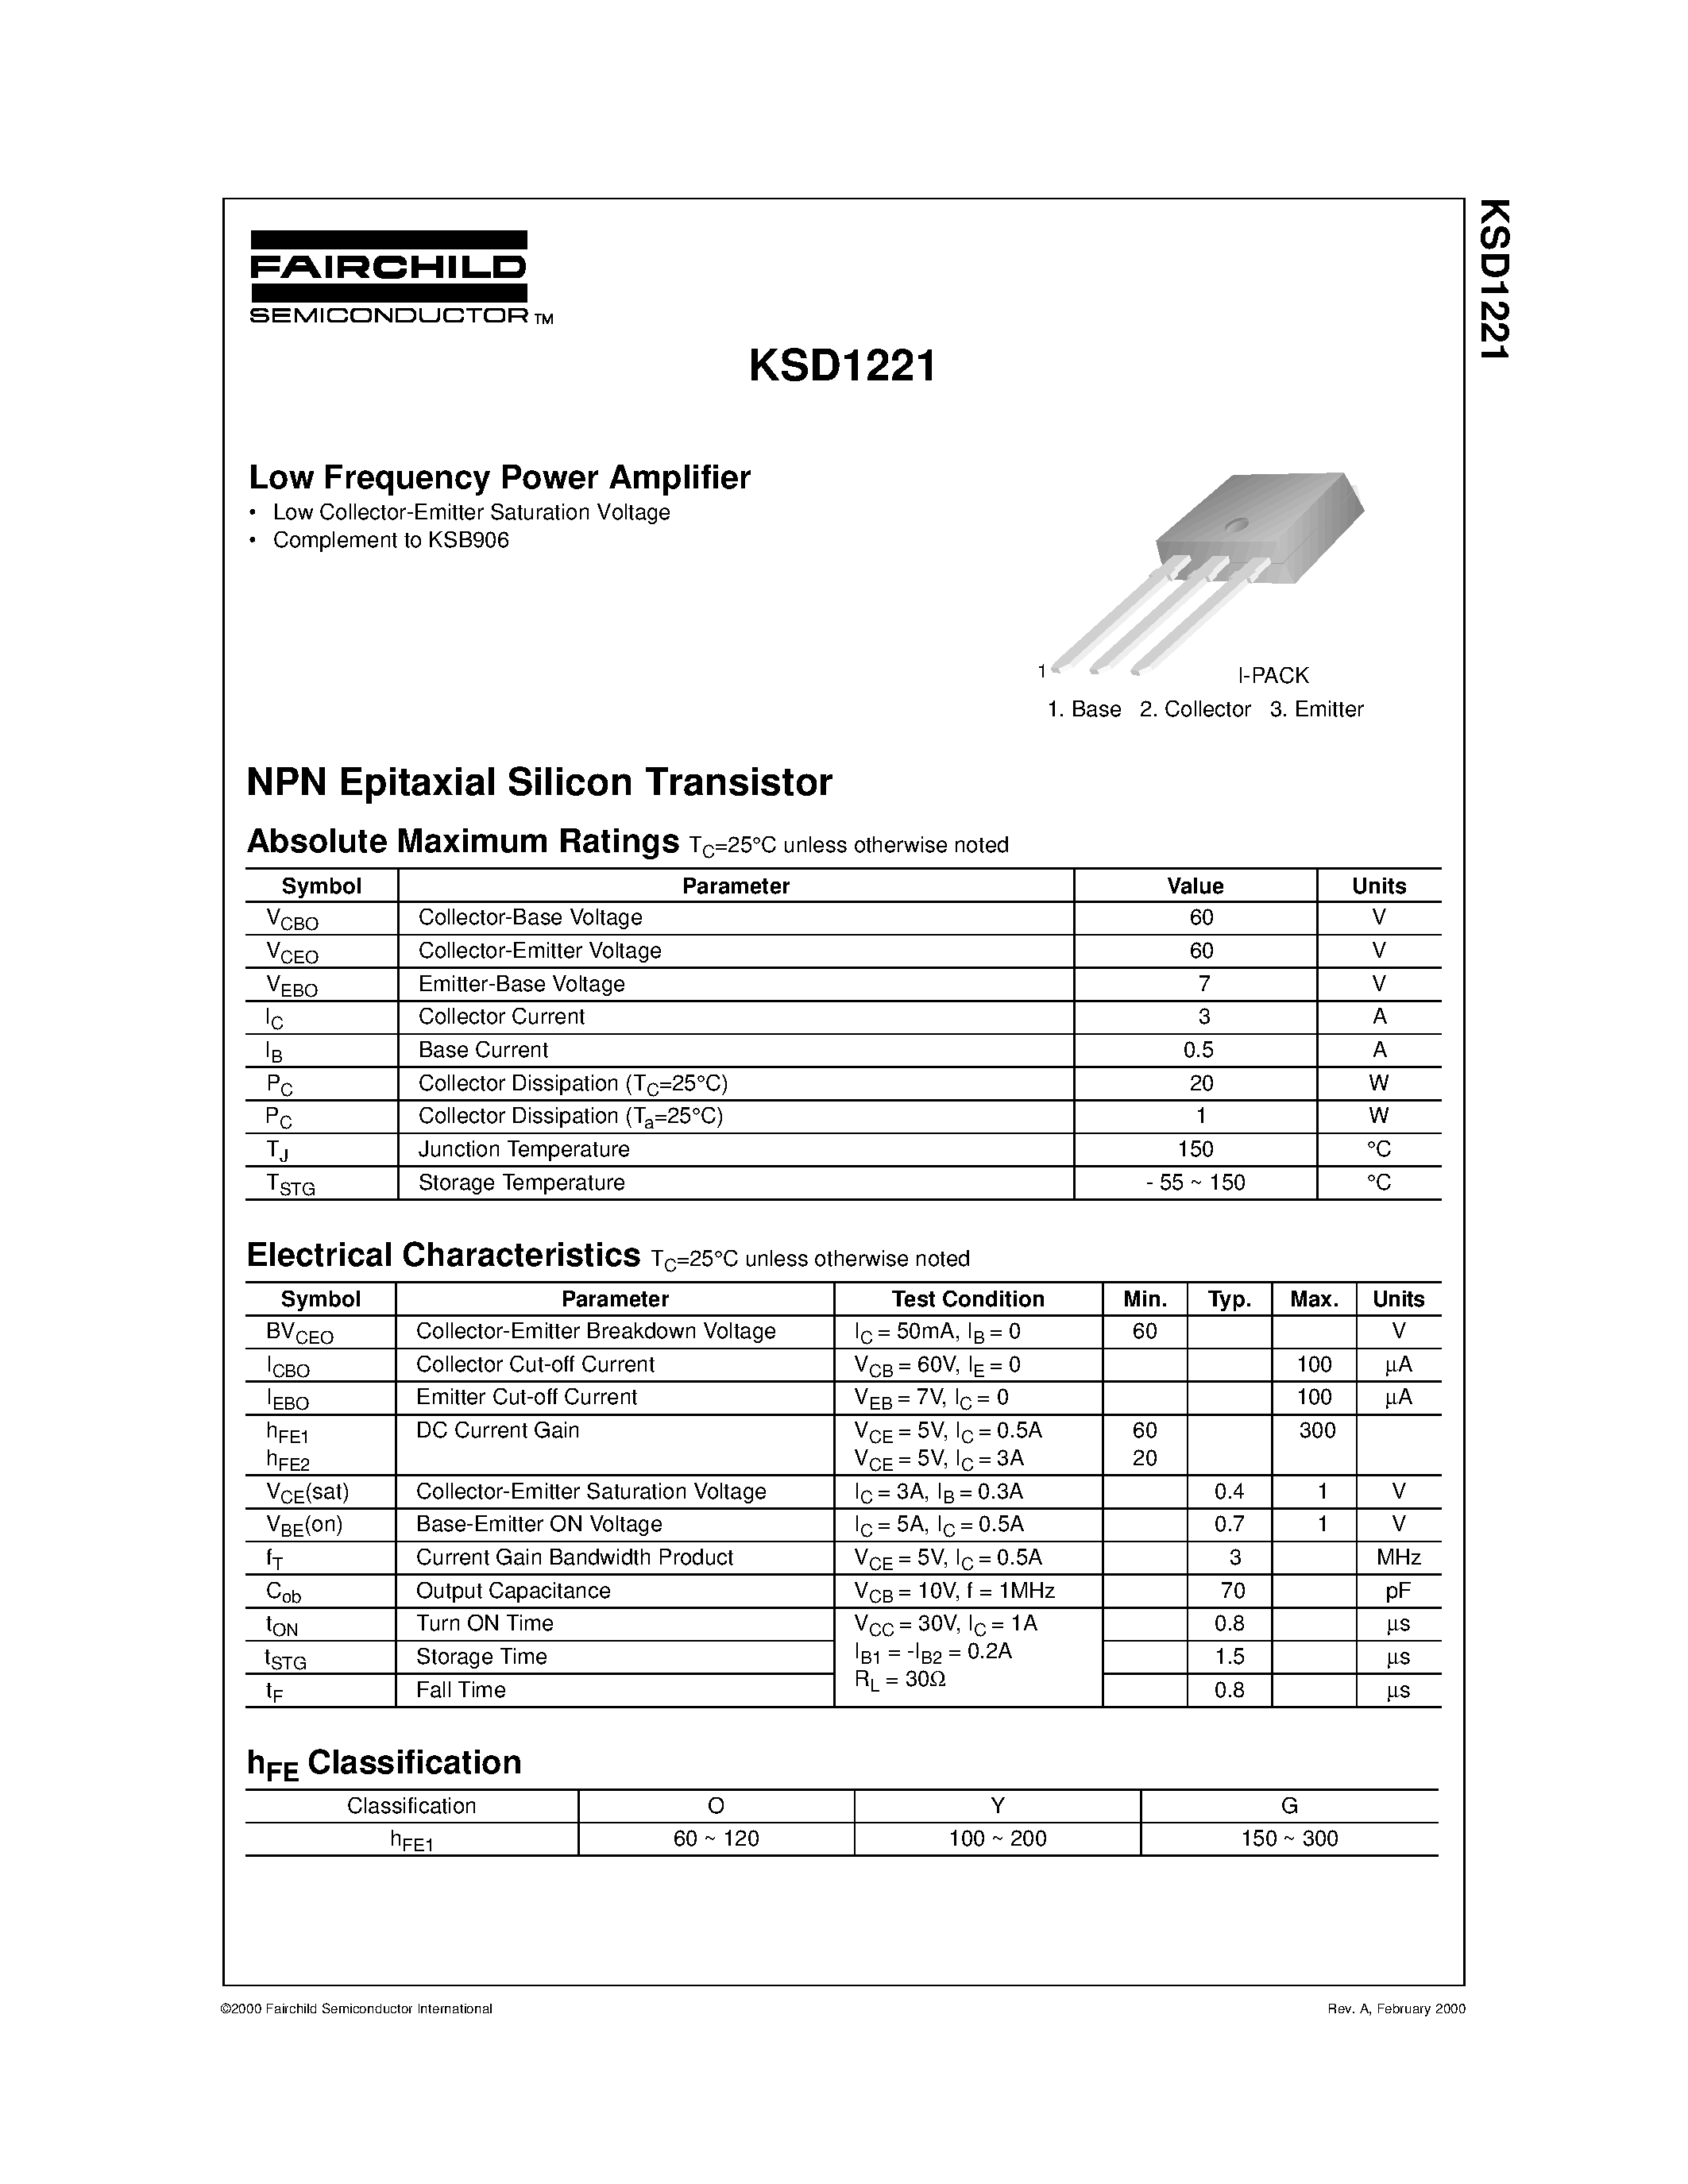 Datasheet KSD1221 - Low Frequency Power Amplifier page 1